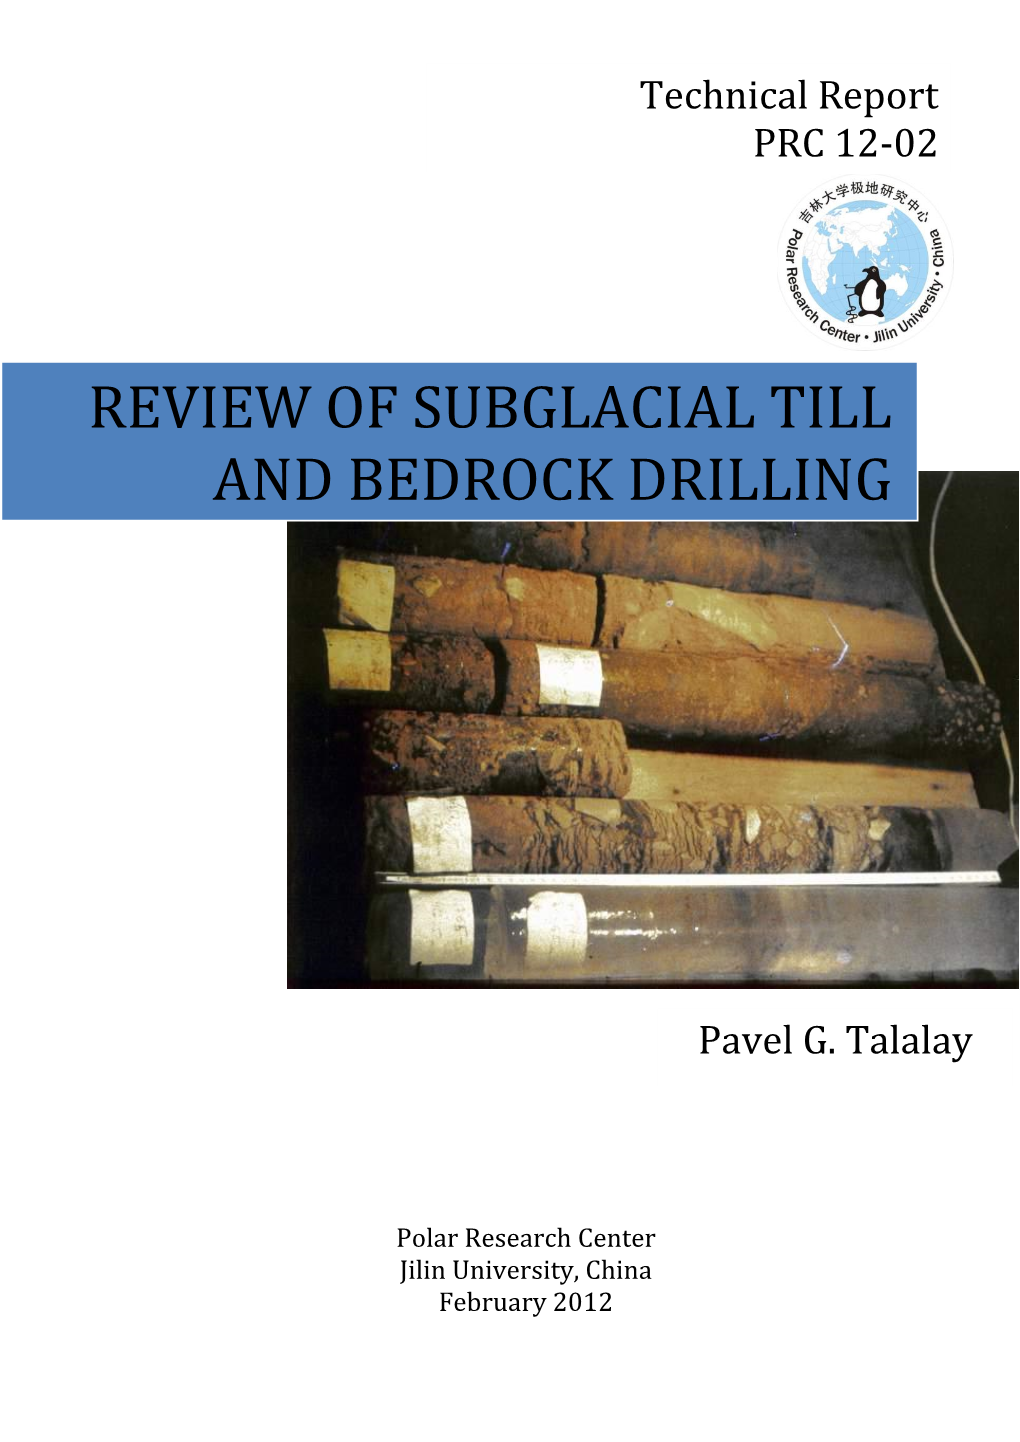 Review on Subglacial Till and Bedrock Drilling